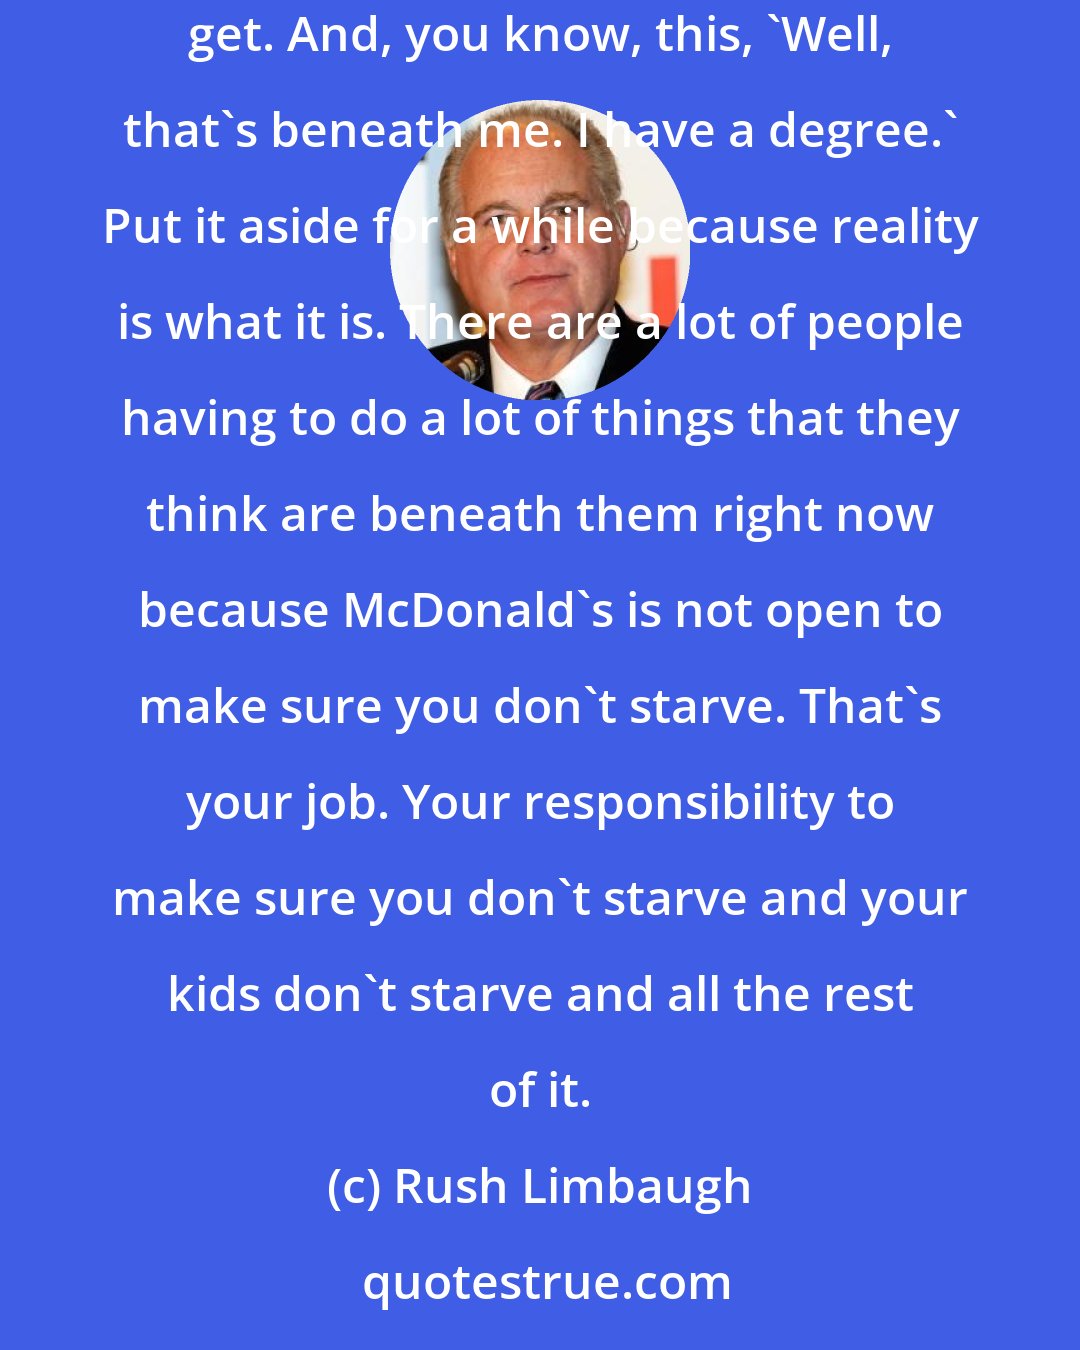 Rush Limbaugh: I hated being stuck at home doing the student thing. I always wanted to work. And there's nothing wrong with it. So you can take what you can get. And, you know, this, 'Well, that's beneath me. I have a degree.' Put it aside for a while because reality is what it is. There are a lot of people having to do a lot of things that they think are beneath them right now because McDonald's is not open to make sure you don't starve. That's your job. Your responsibility to make sure you don't starve and your kids don't starve and all the rest of it.